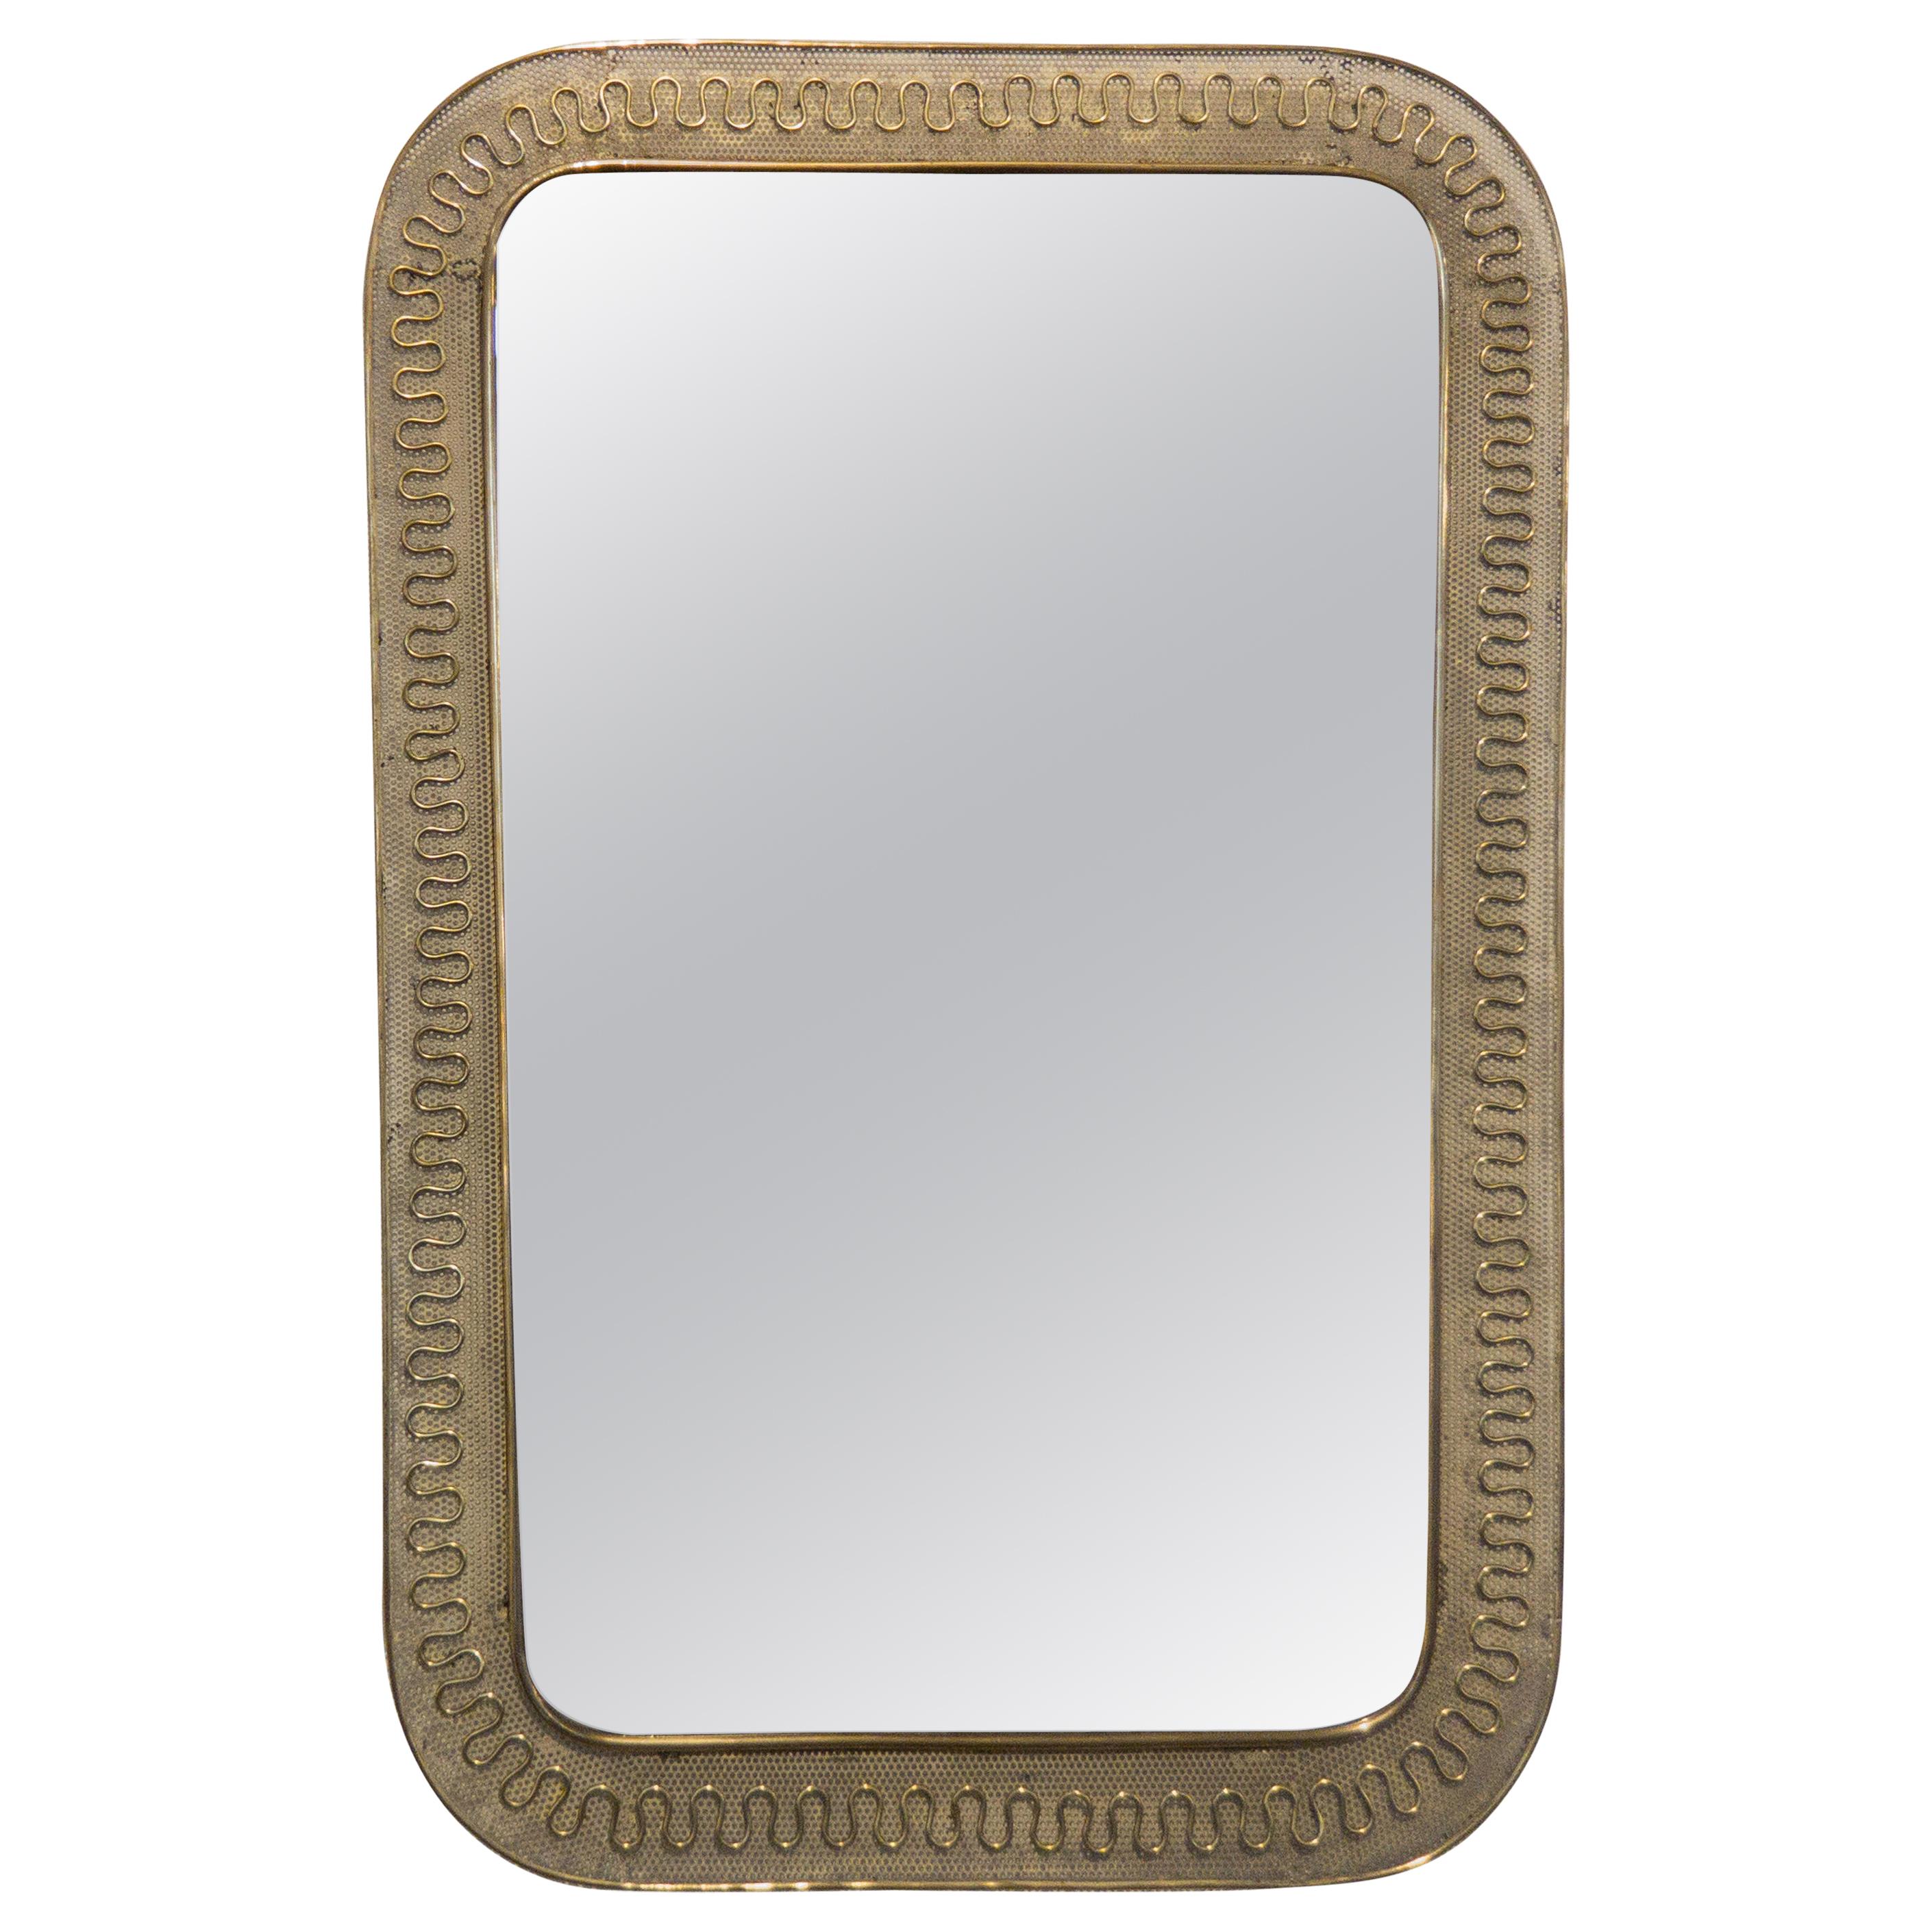 Italian Midcentury Design Wall Mirror by Cesare Lacca made from Brass, 1950s For Sale